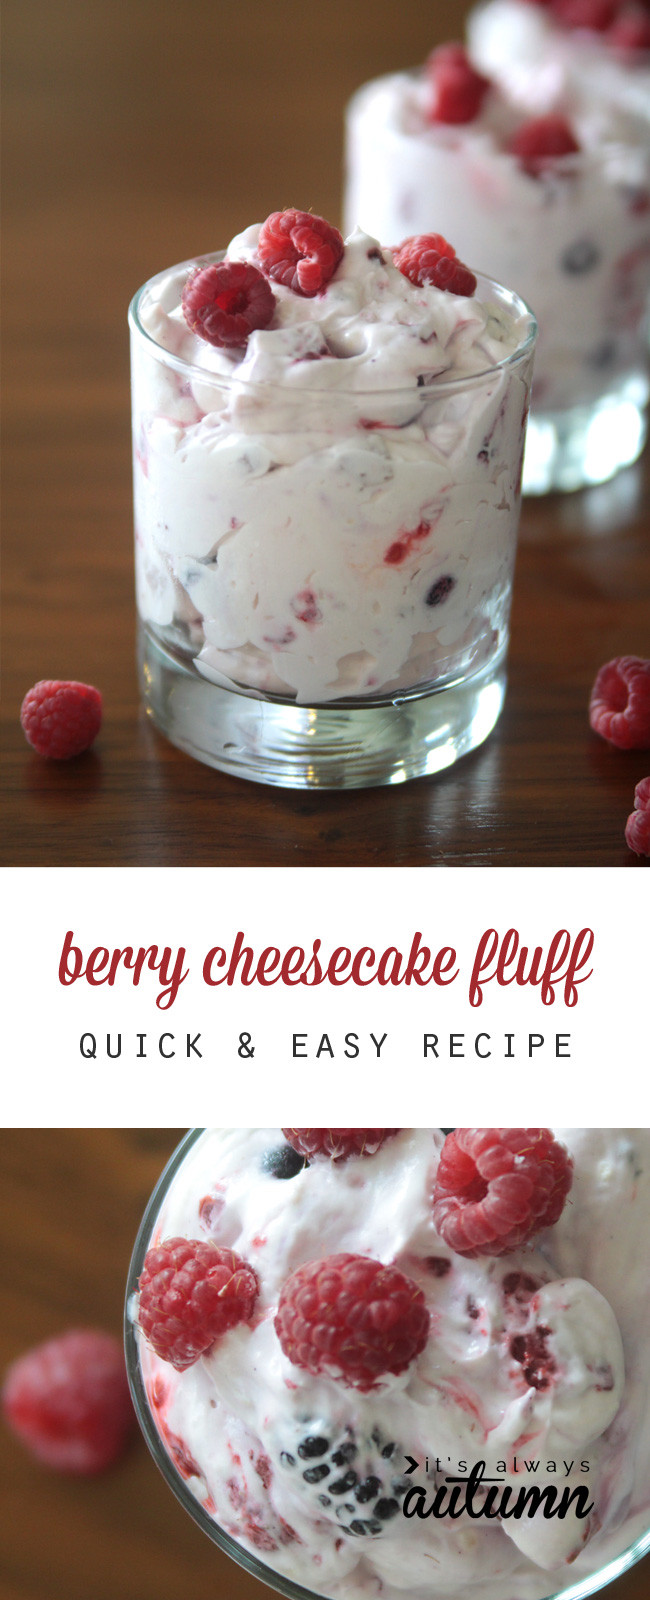 Quick And Easy Healthy Desserts
 berry cheesecake fluff a lighter holiday dessert It s